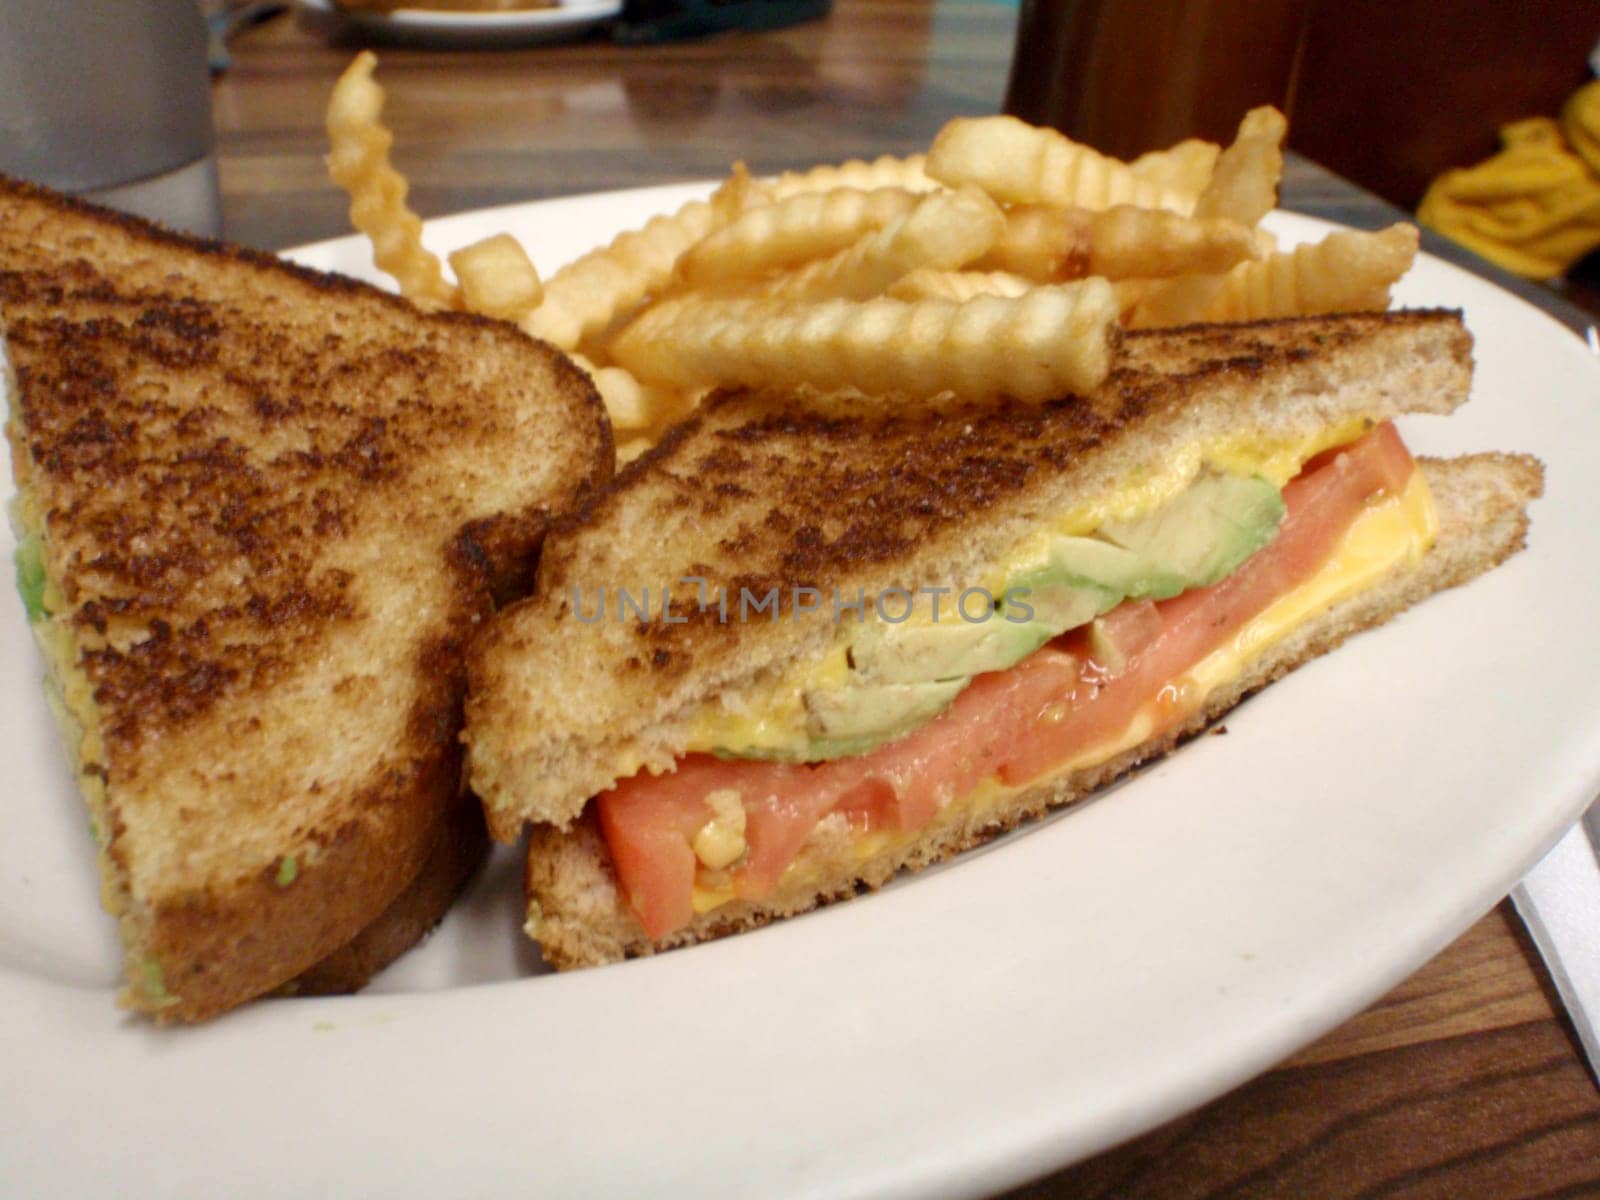 Avocado Tomato Cheese Sandwich with Fries by EricGBVD